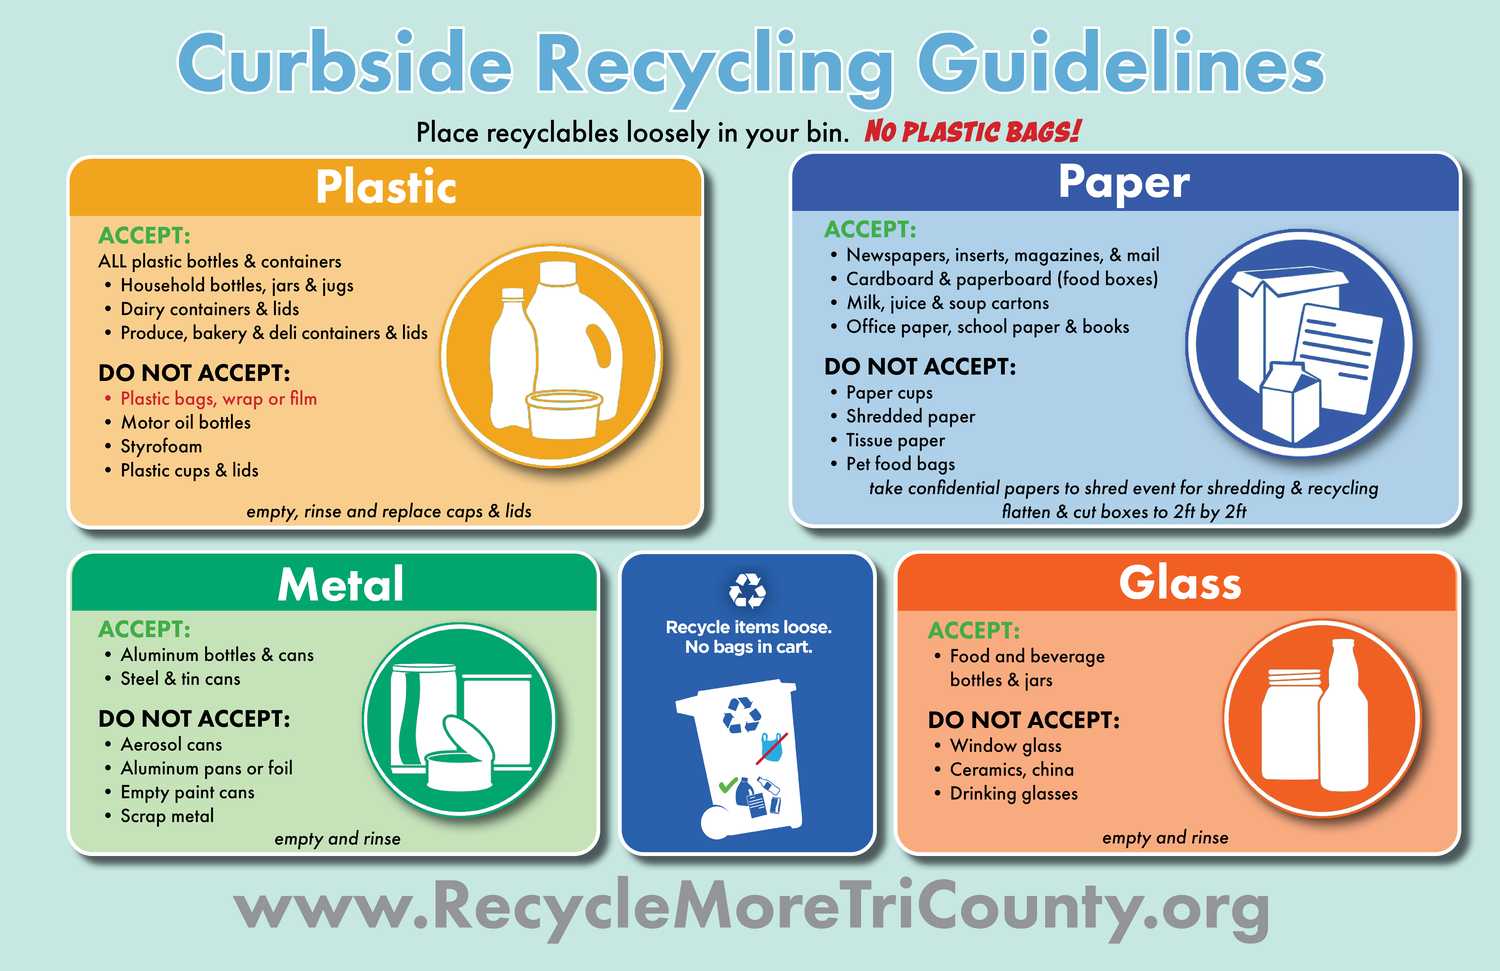 Town of Neenah Curbside Recycling